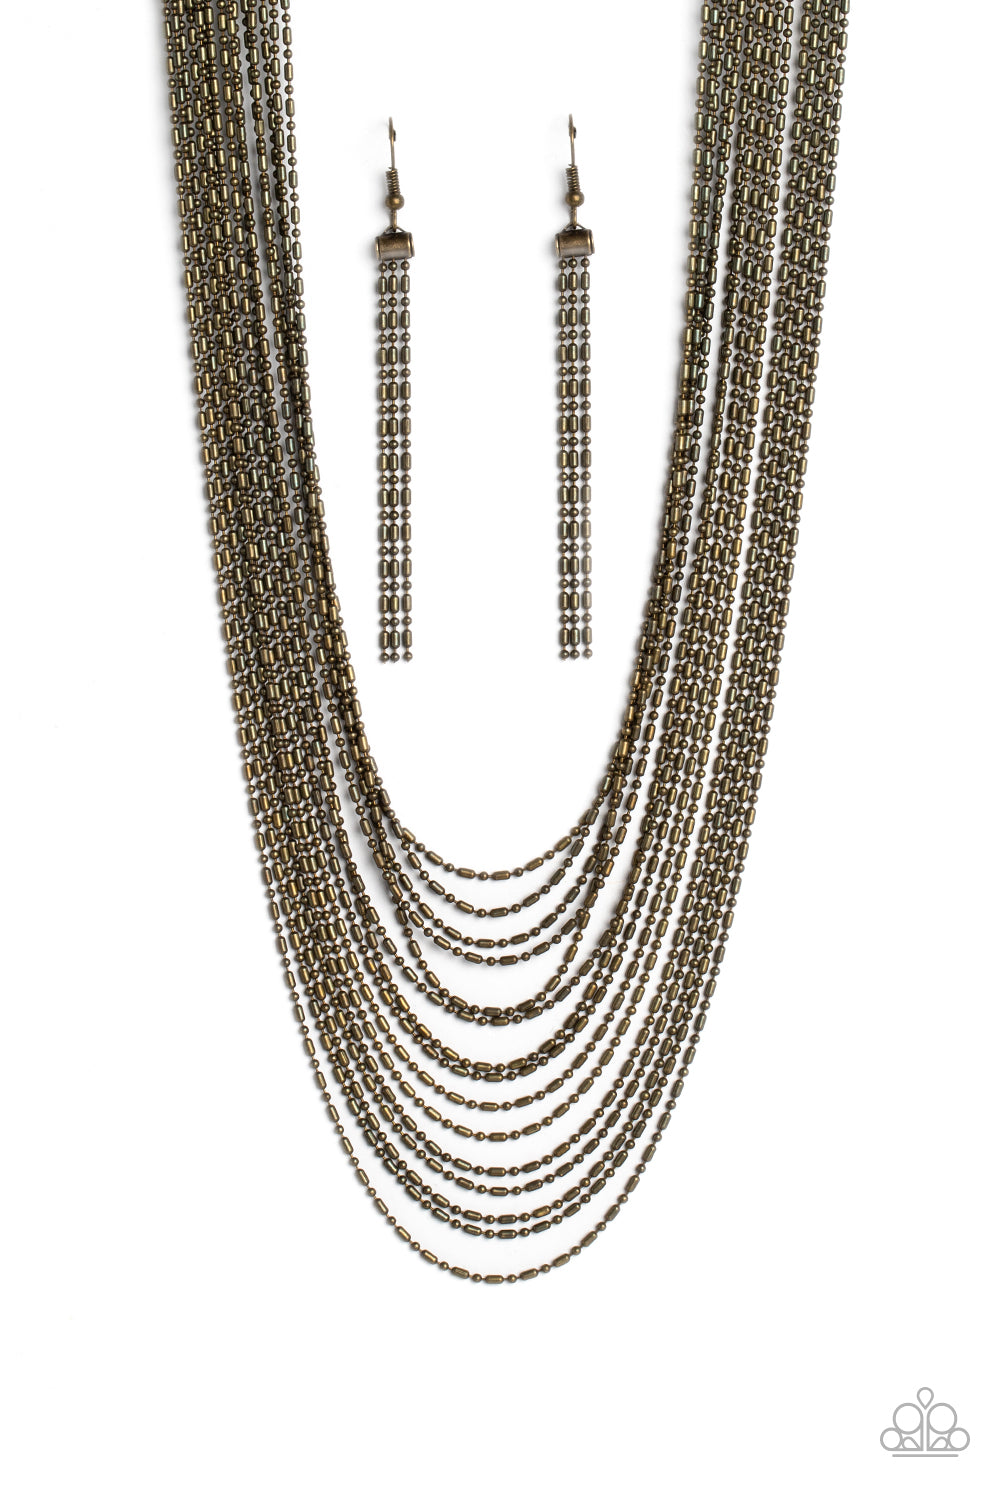 Cascading Chains Brass Necklace - Paparazzi Accessories  Suspended from two brass, horizontal bars, a shimmery cascade of brass ball-and-bar chains layer around the neck for an industrial statement. Features an adjustable clasp closure.  Sold as one individual necklace. Includes one pair of matching earrings.  P2ST-BRXX-110XX